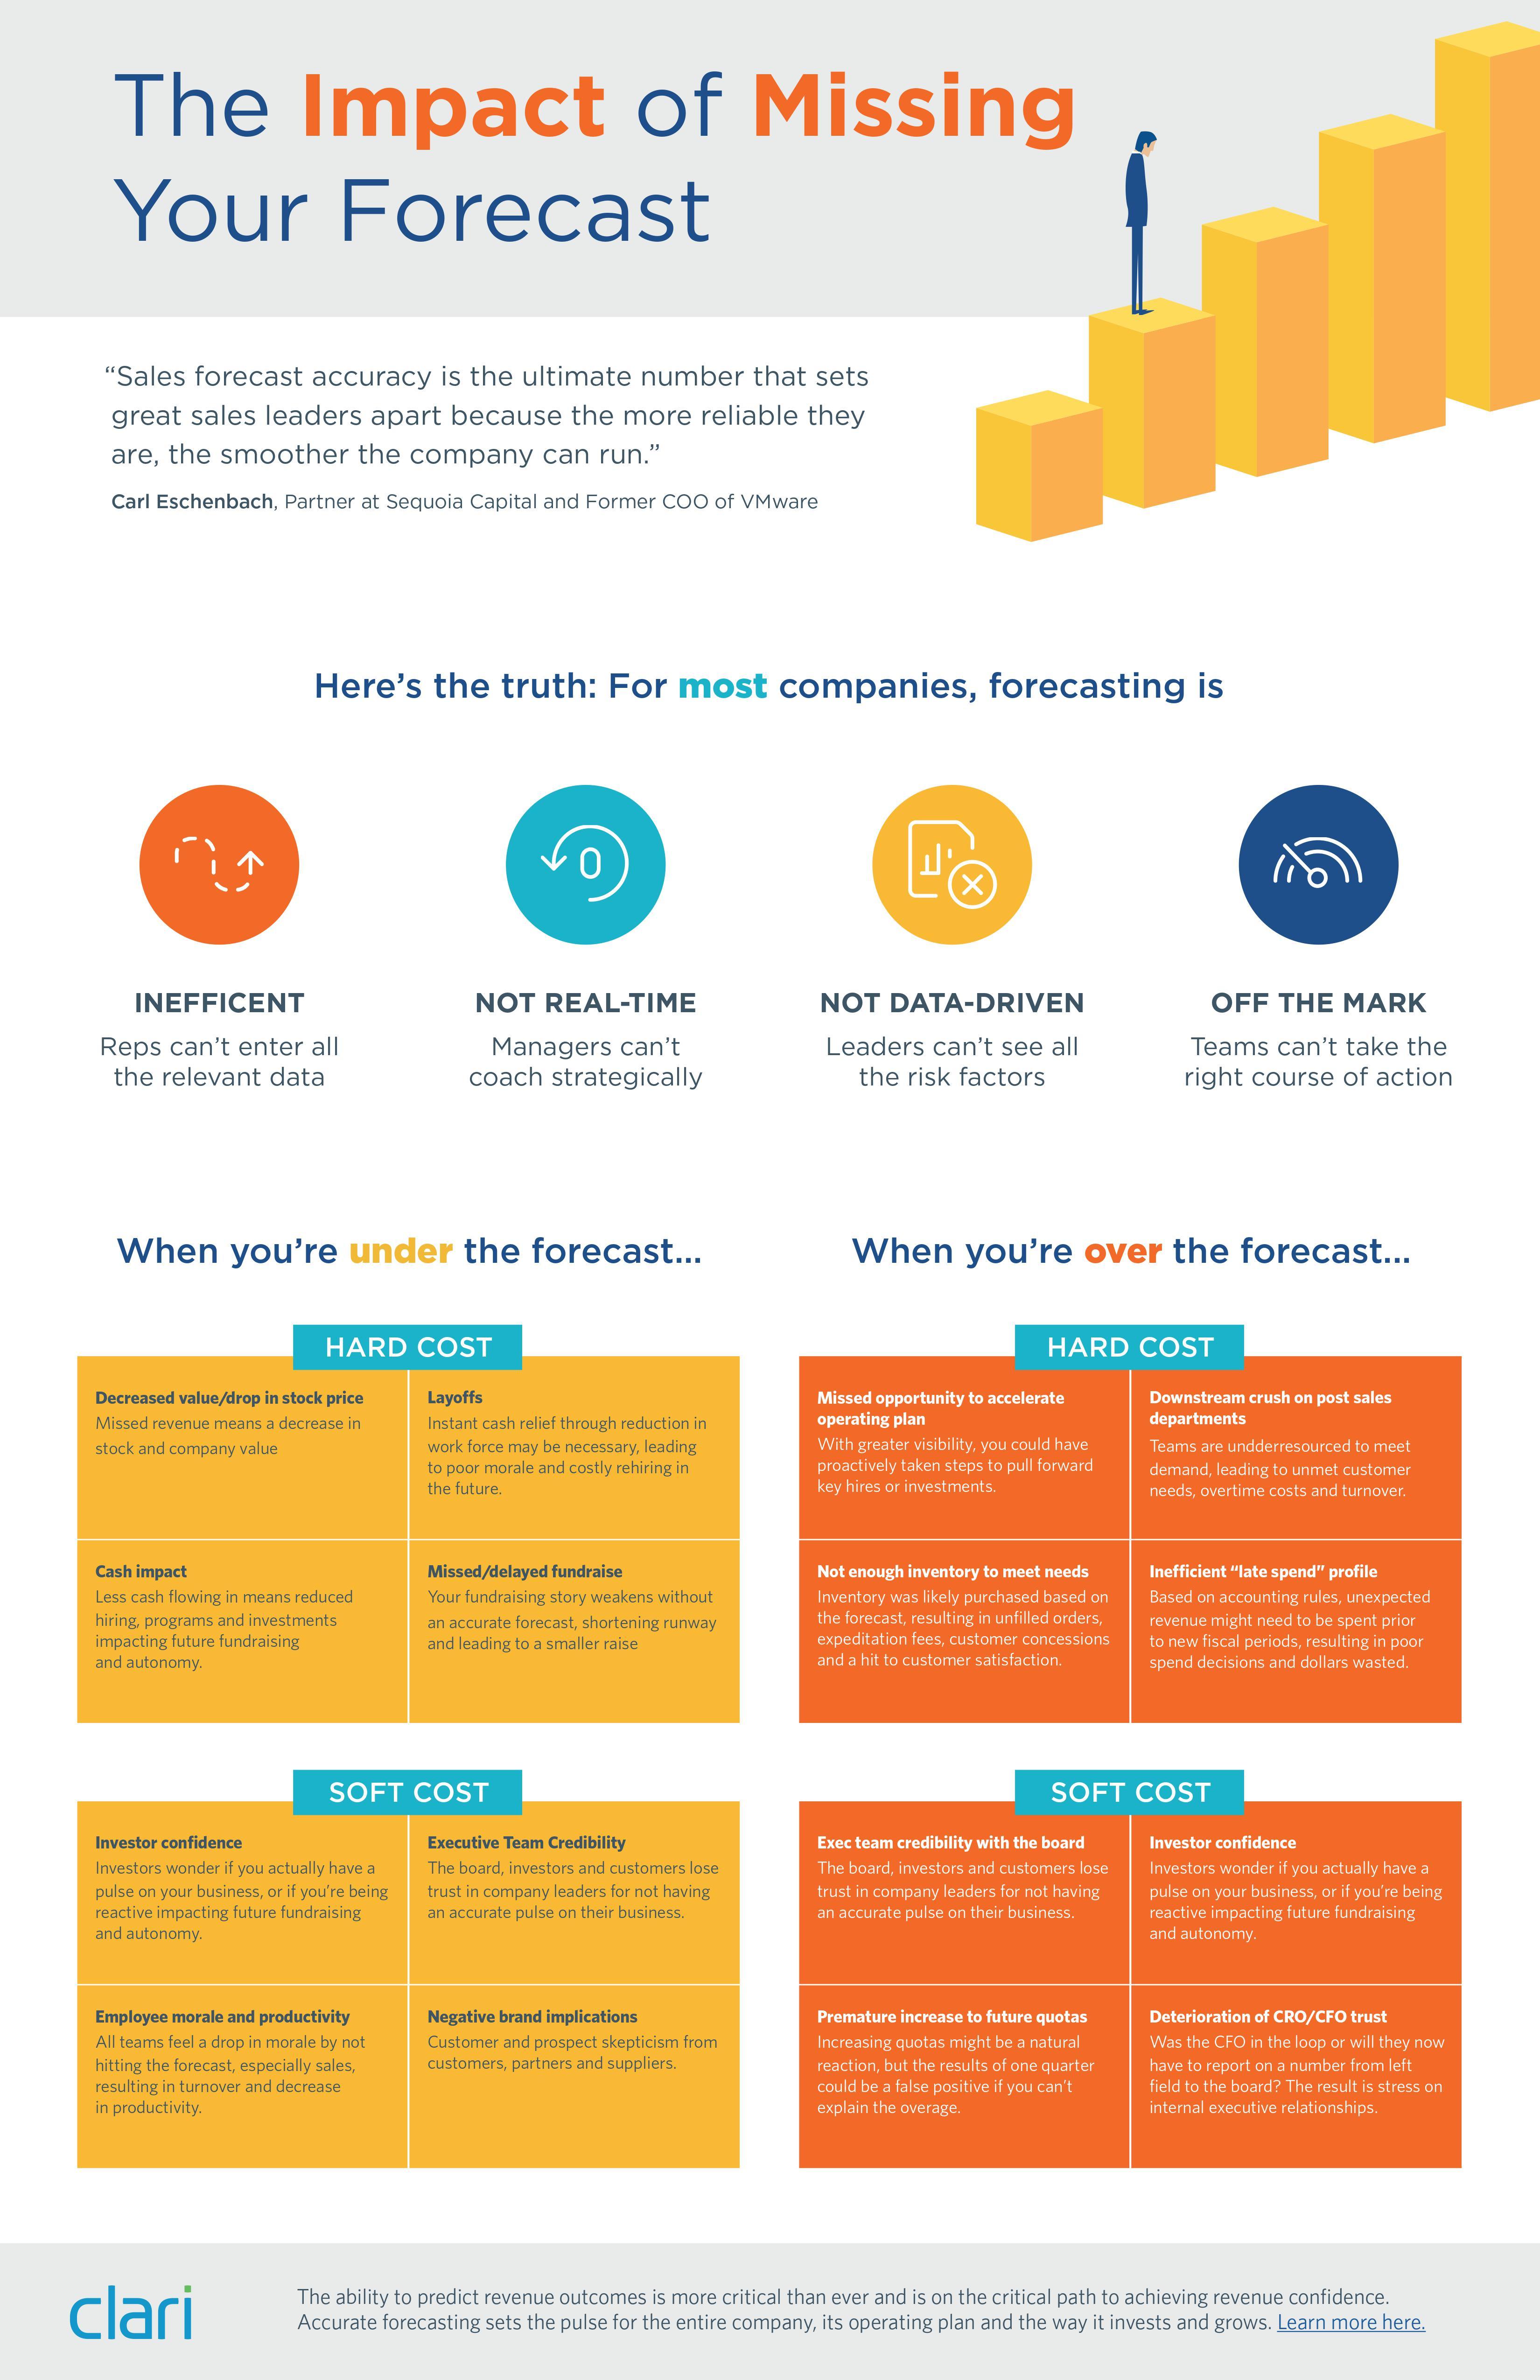 The Impact of Missing Your Forecasting infographic